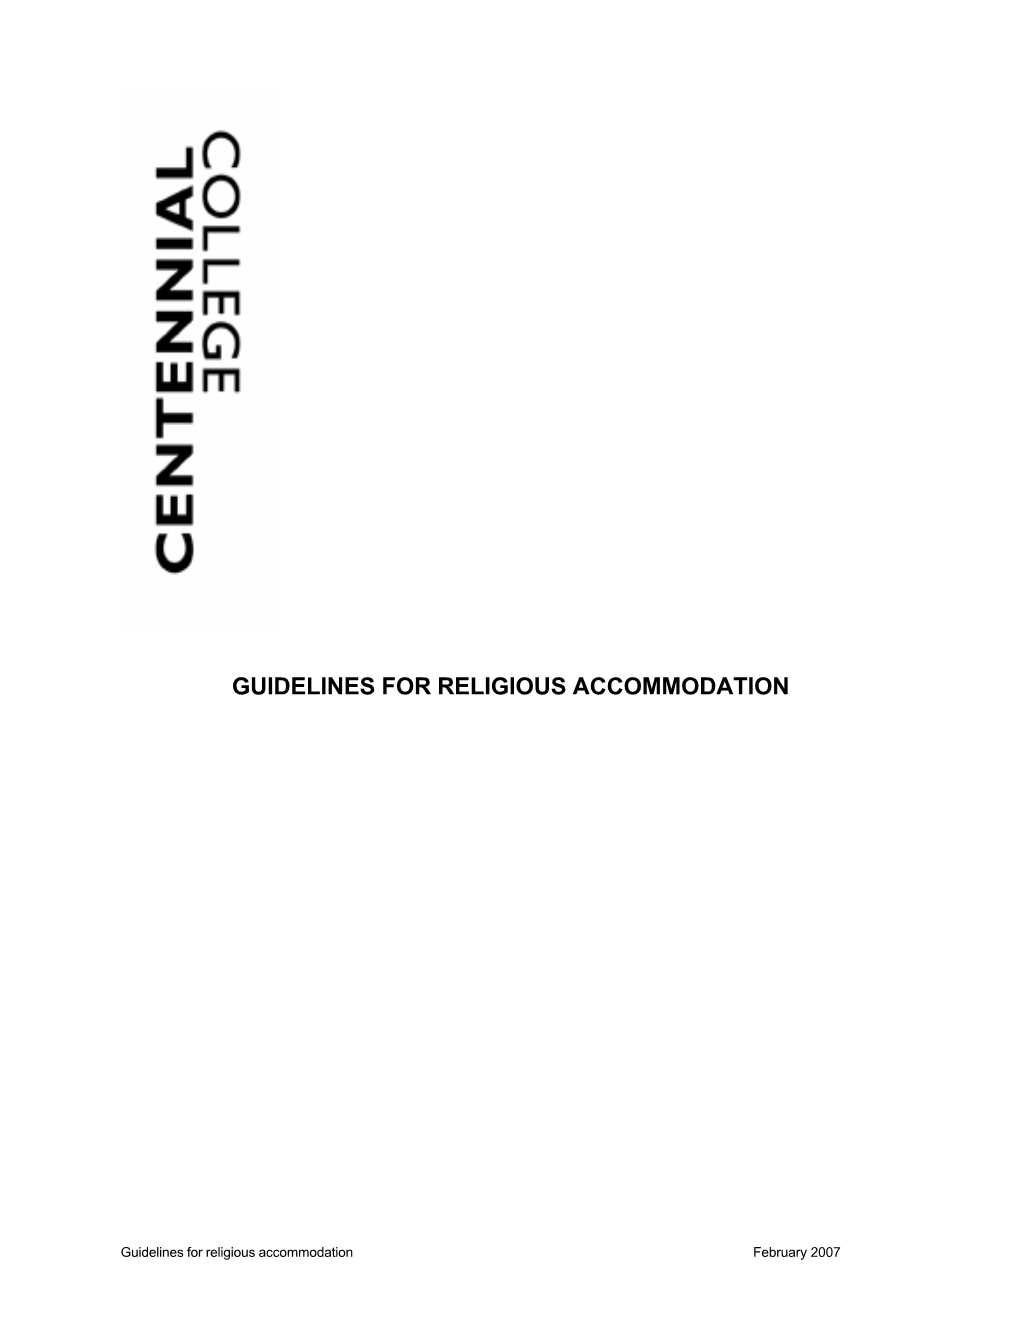 Guidelines for Religious Accommodation